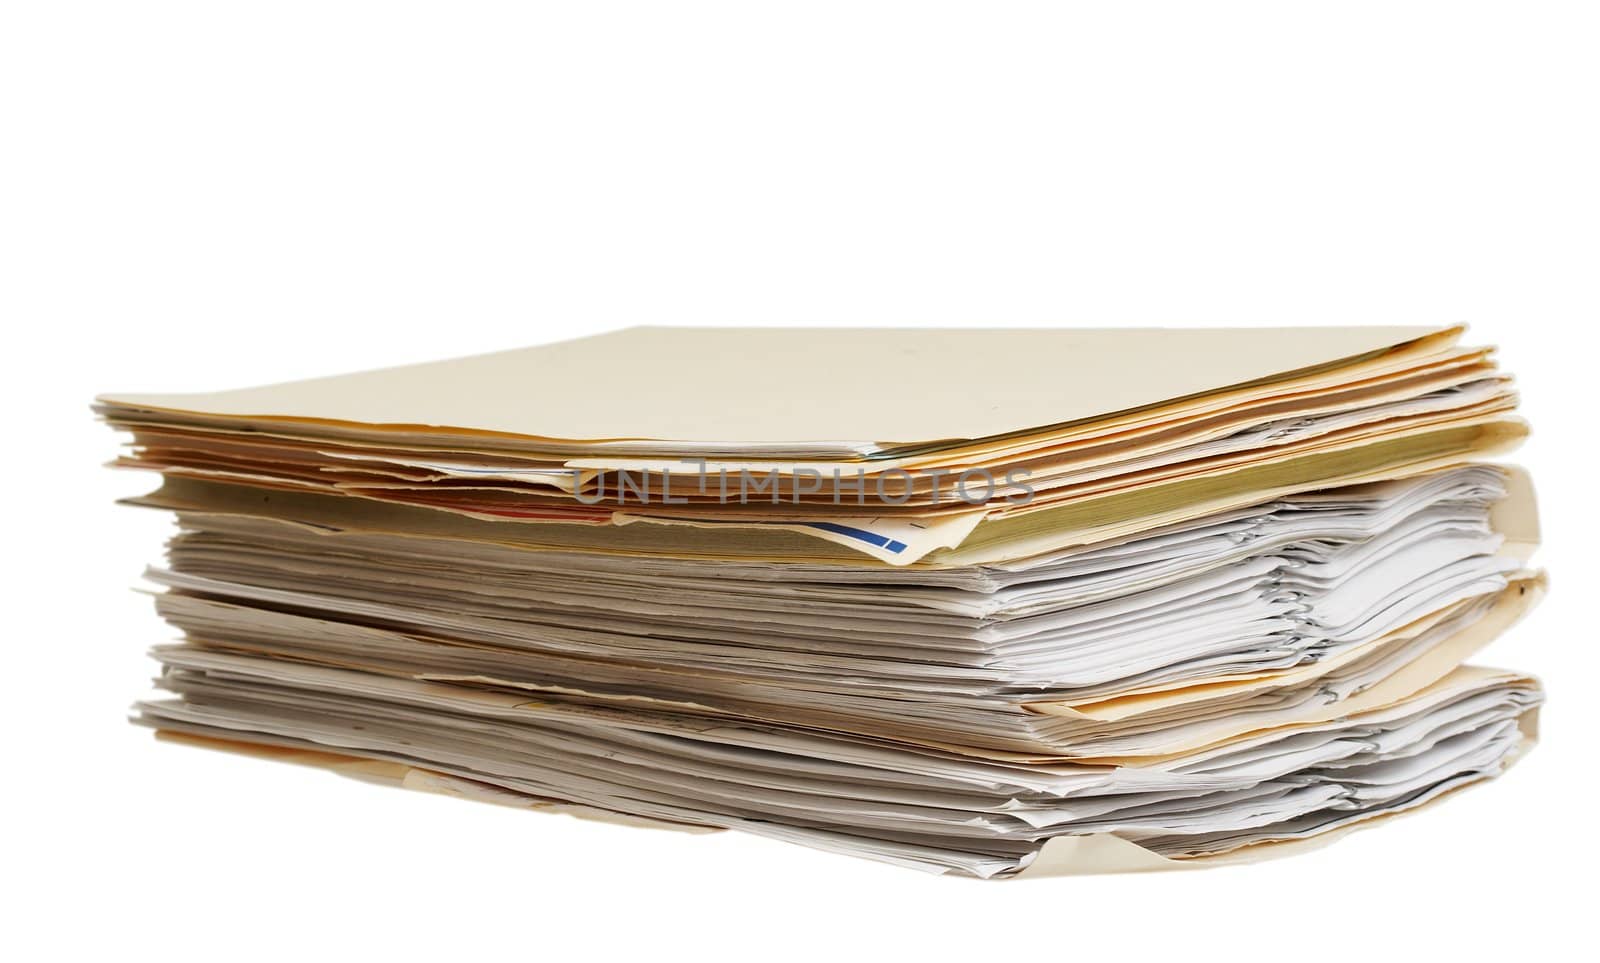 a pile of file folders on a white background